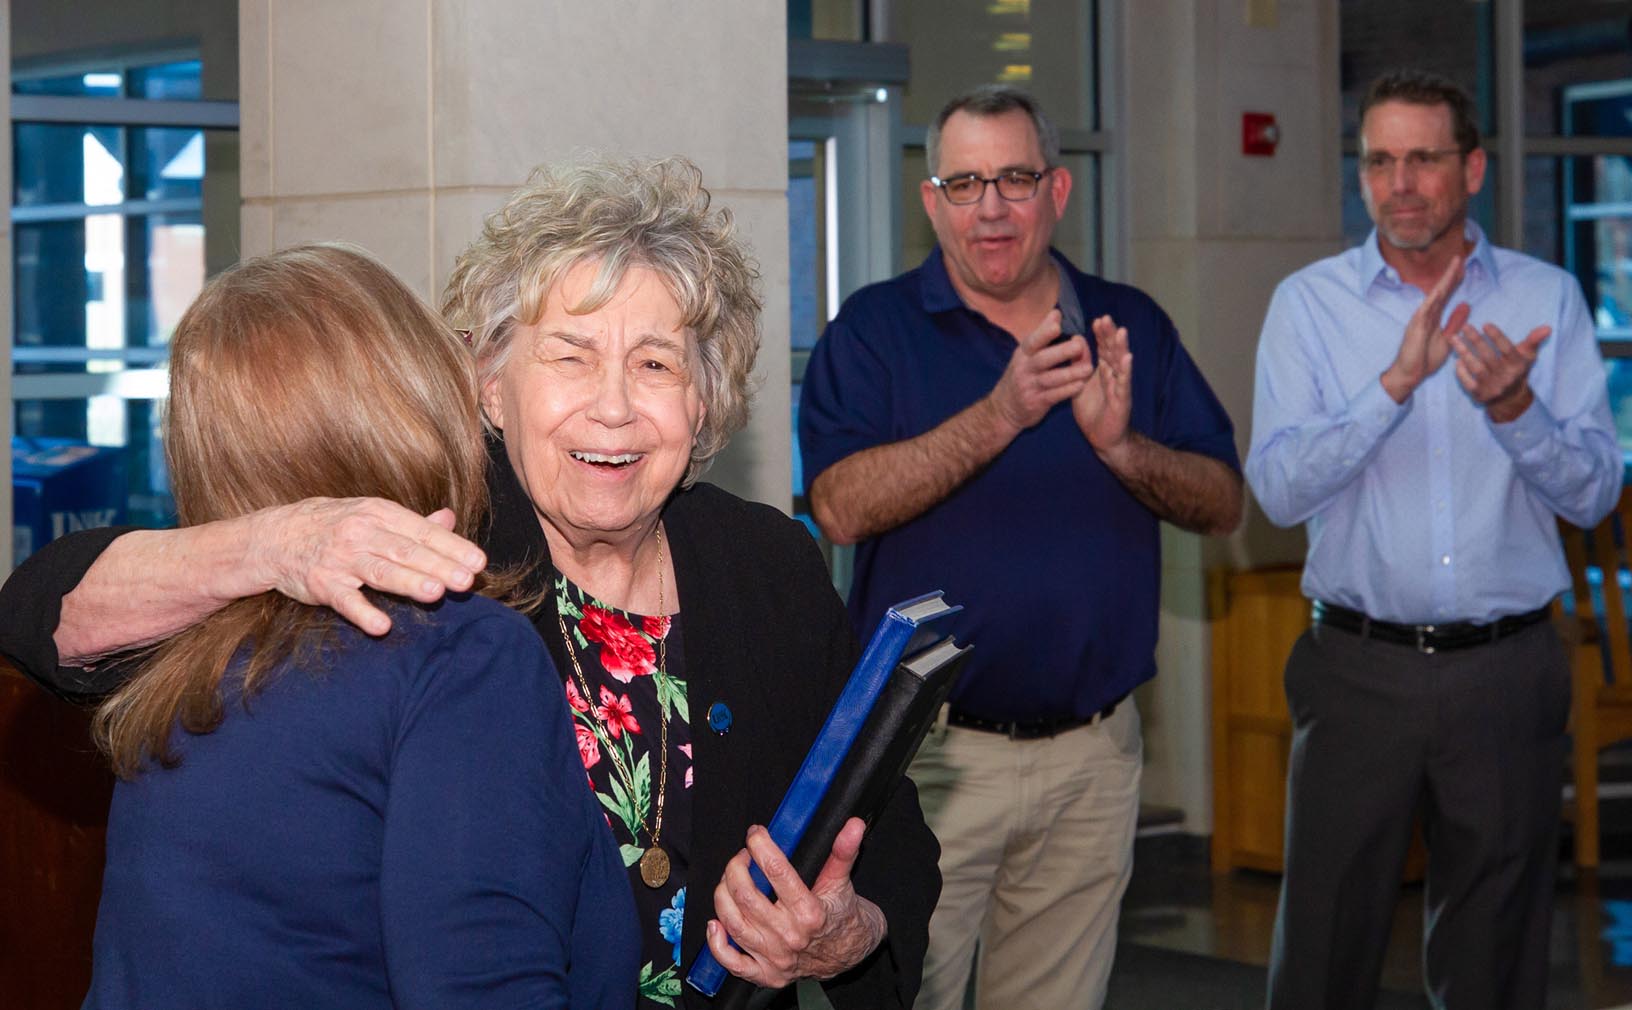 Patricia Hoehner, second from left, a professor of educational administration at UNK, hugs interim College of Education Dean Grace Mims during Friday’s dedication of the Hoehner Family Conference Room. (Photos by Chase Harmon, UNK Communications)